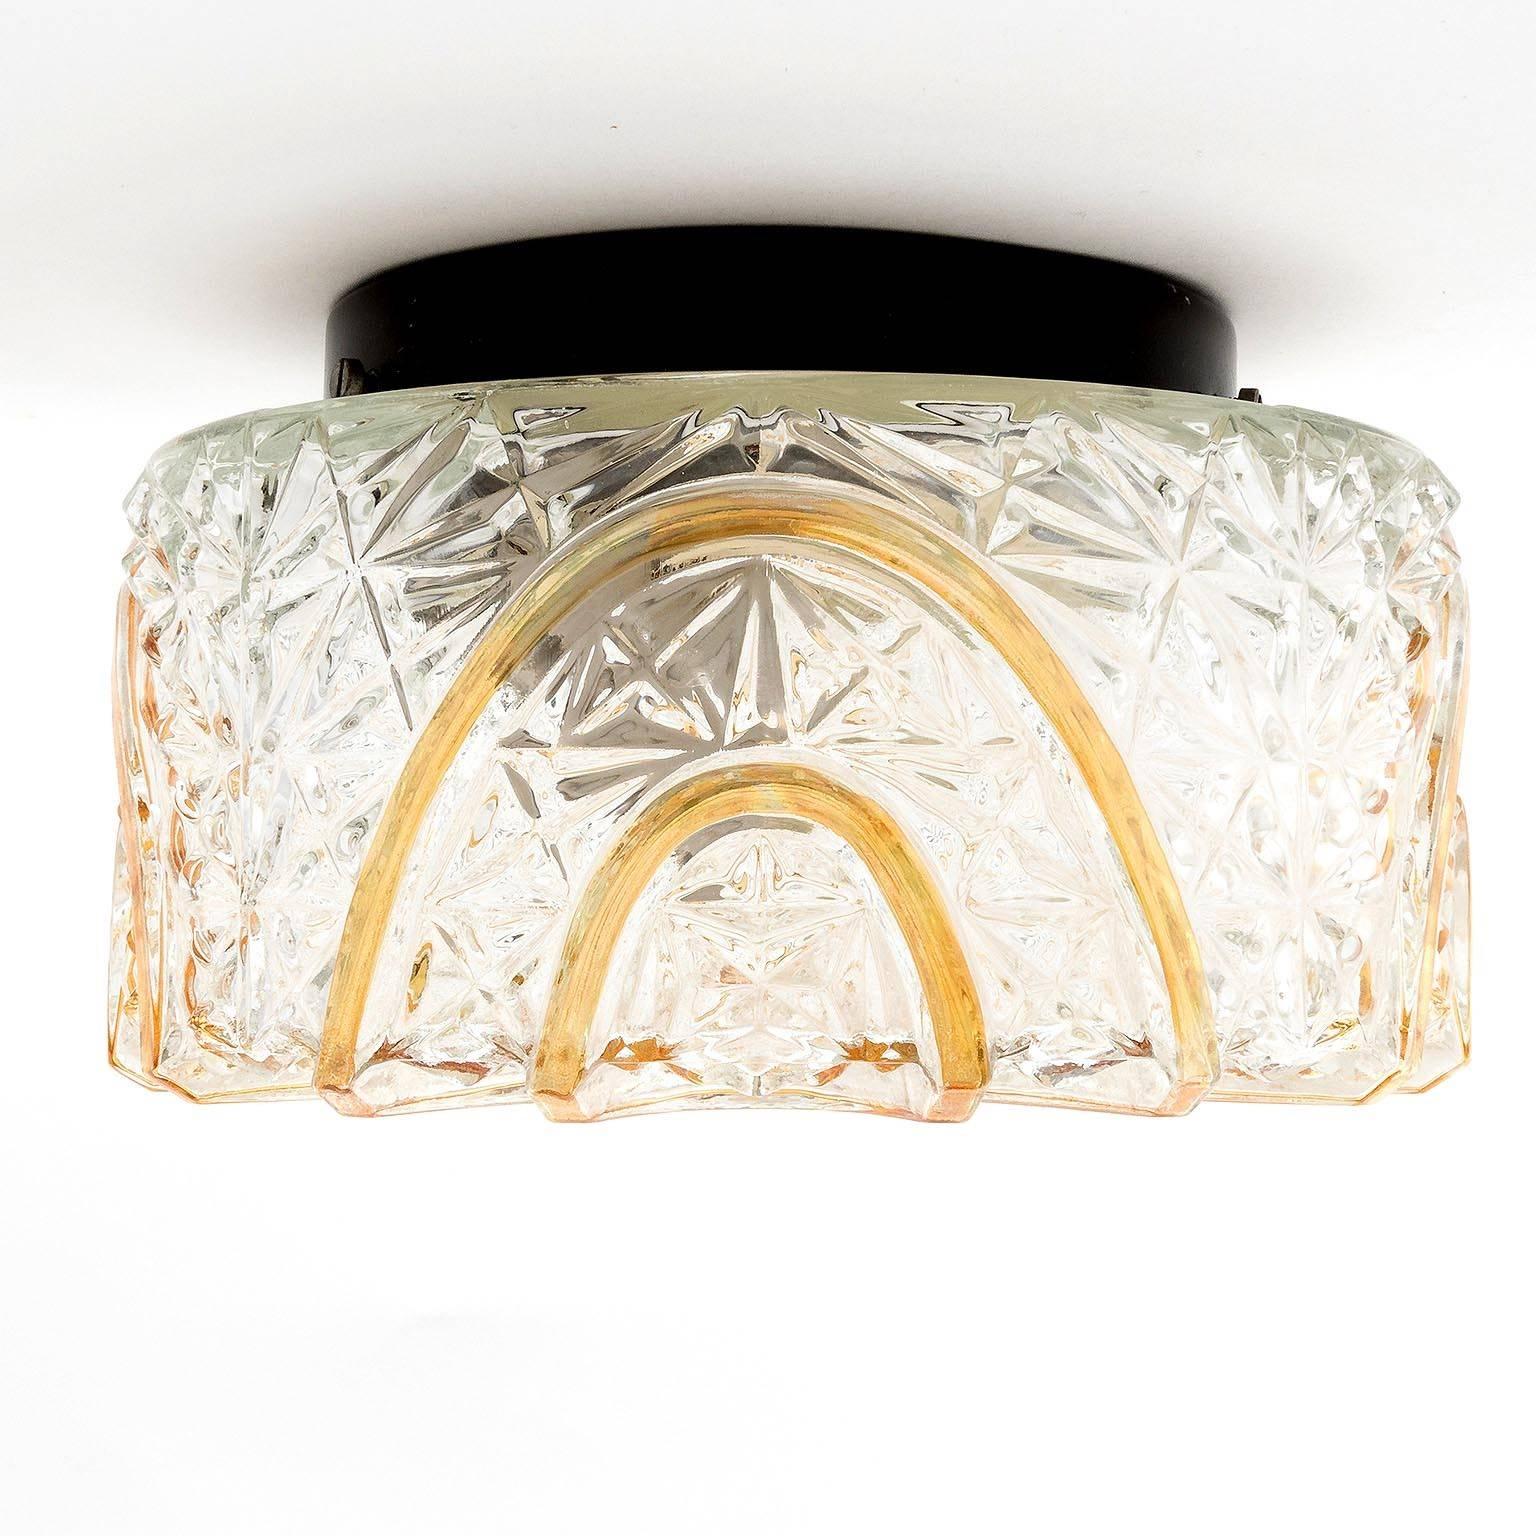 Painted Sconce or Flush Mount Light, Textured Amber Tone Glass, 1970